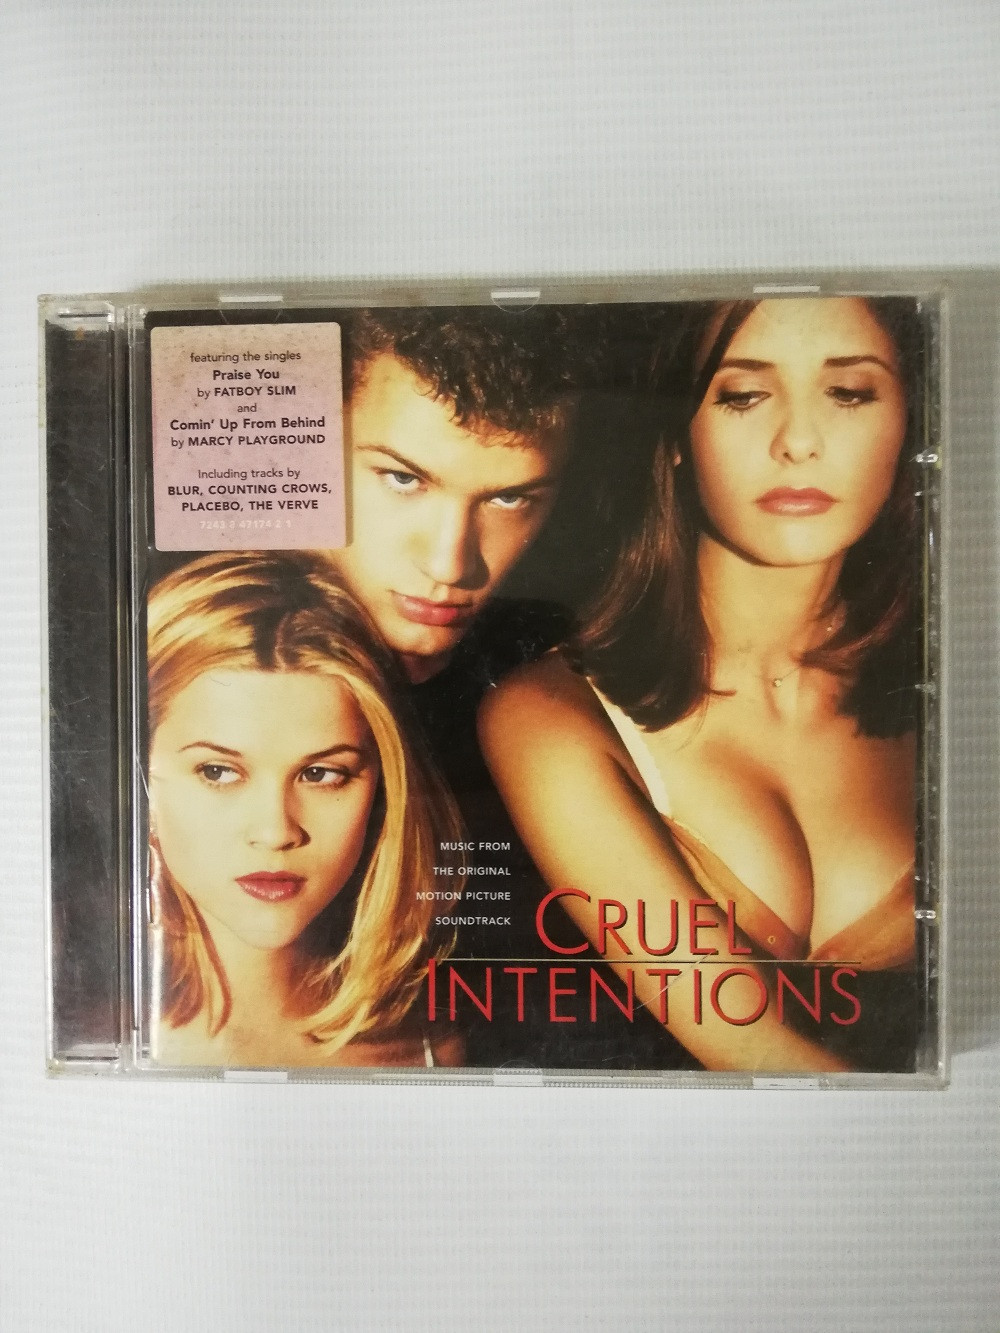 Imagen CD CRUEL INTENTIONS - MUSIC FROM THE ORIGINAL MOTION PICTURE SOUNDTRACK 1